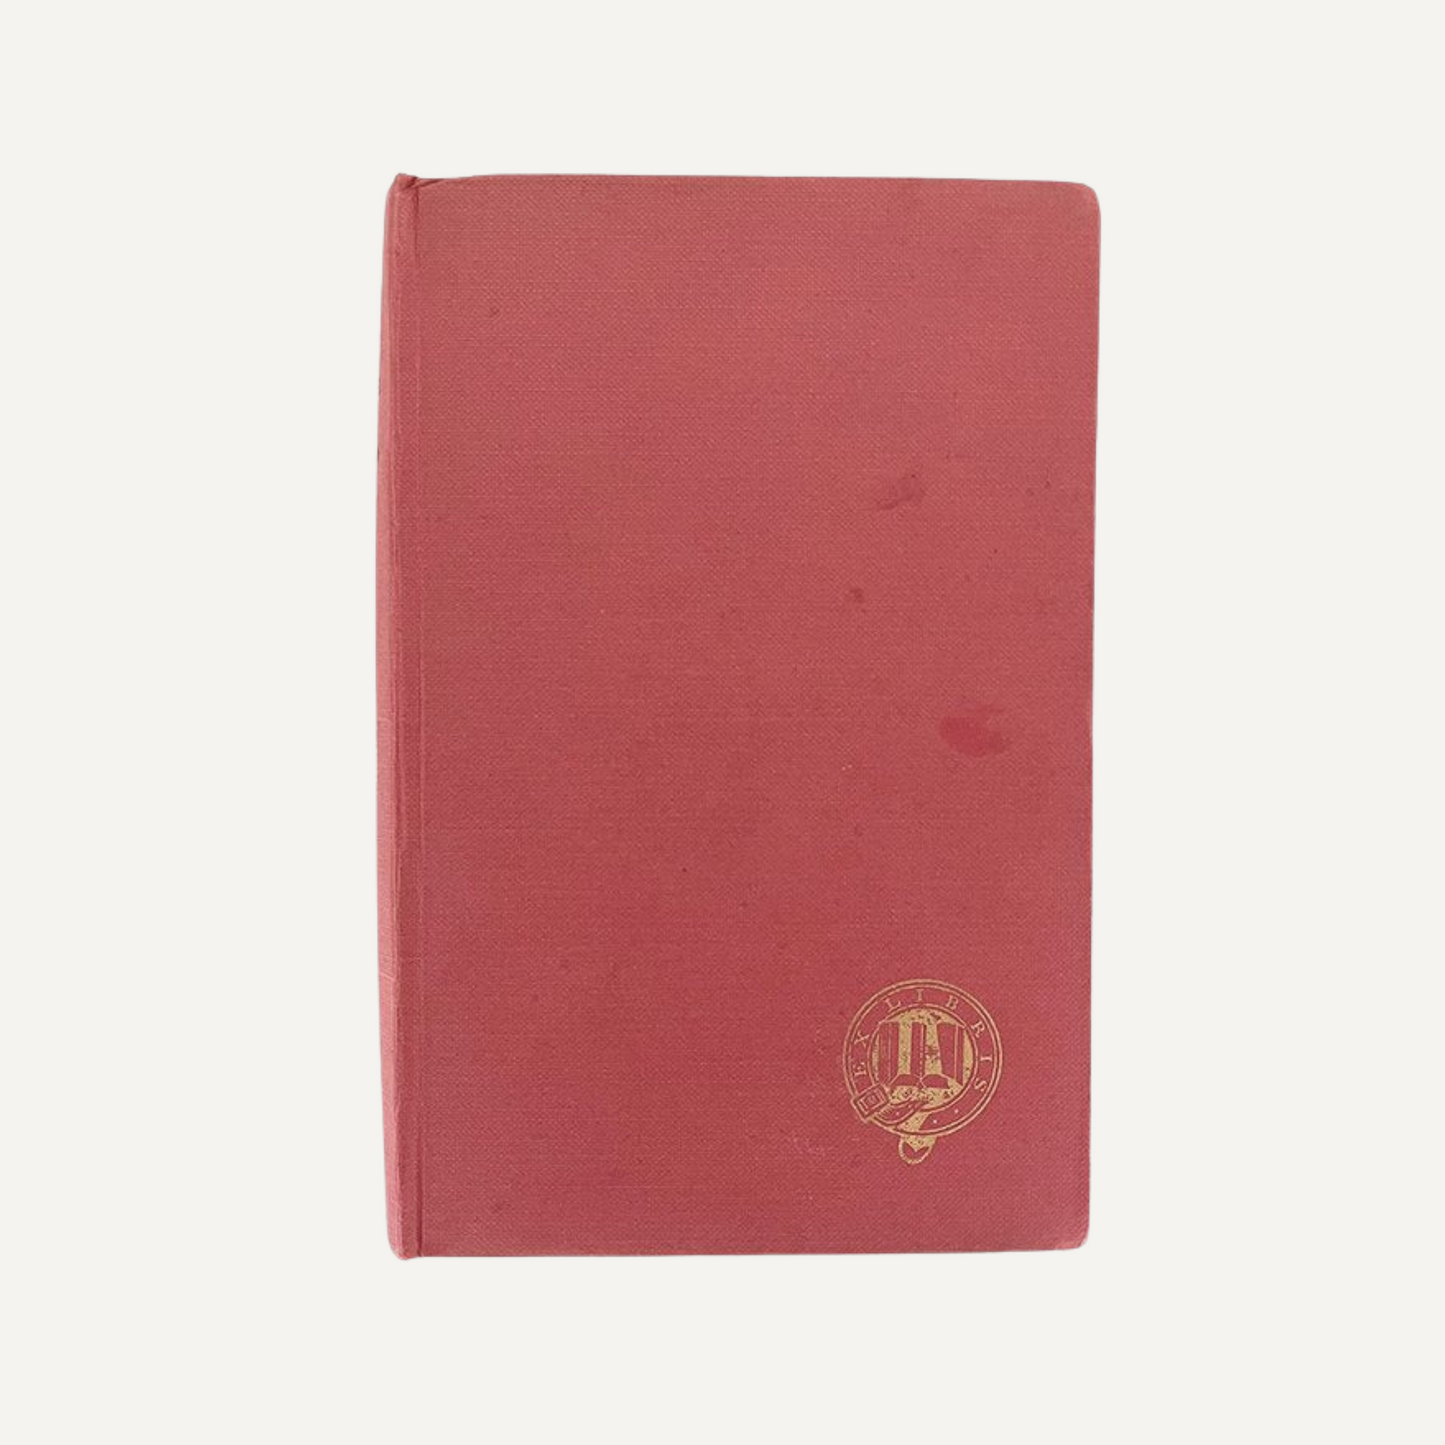 About Blanks - Vintage Notebook